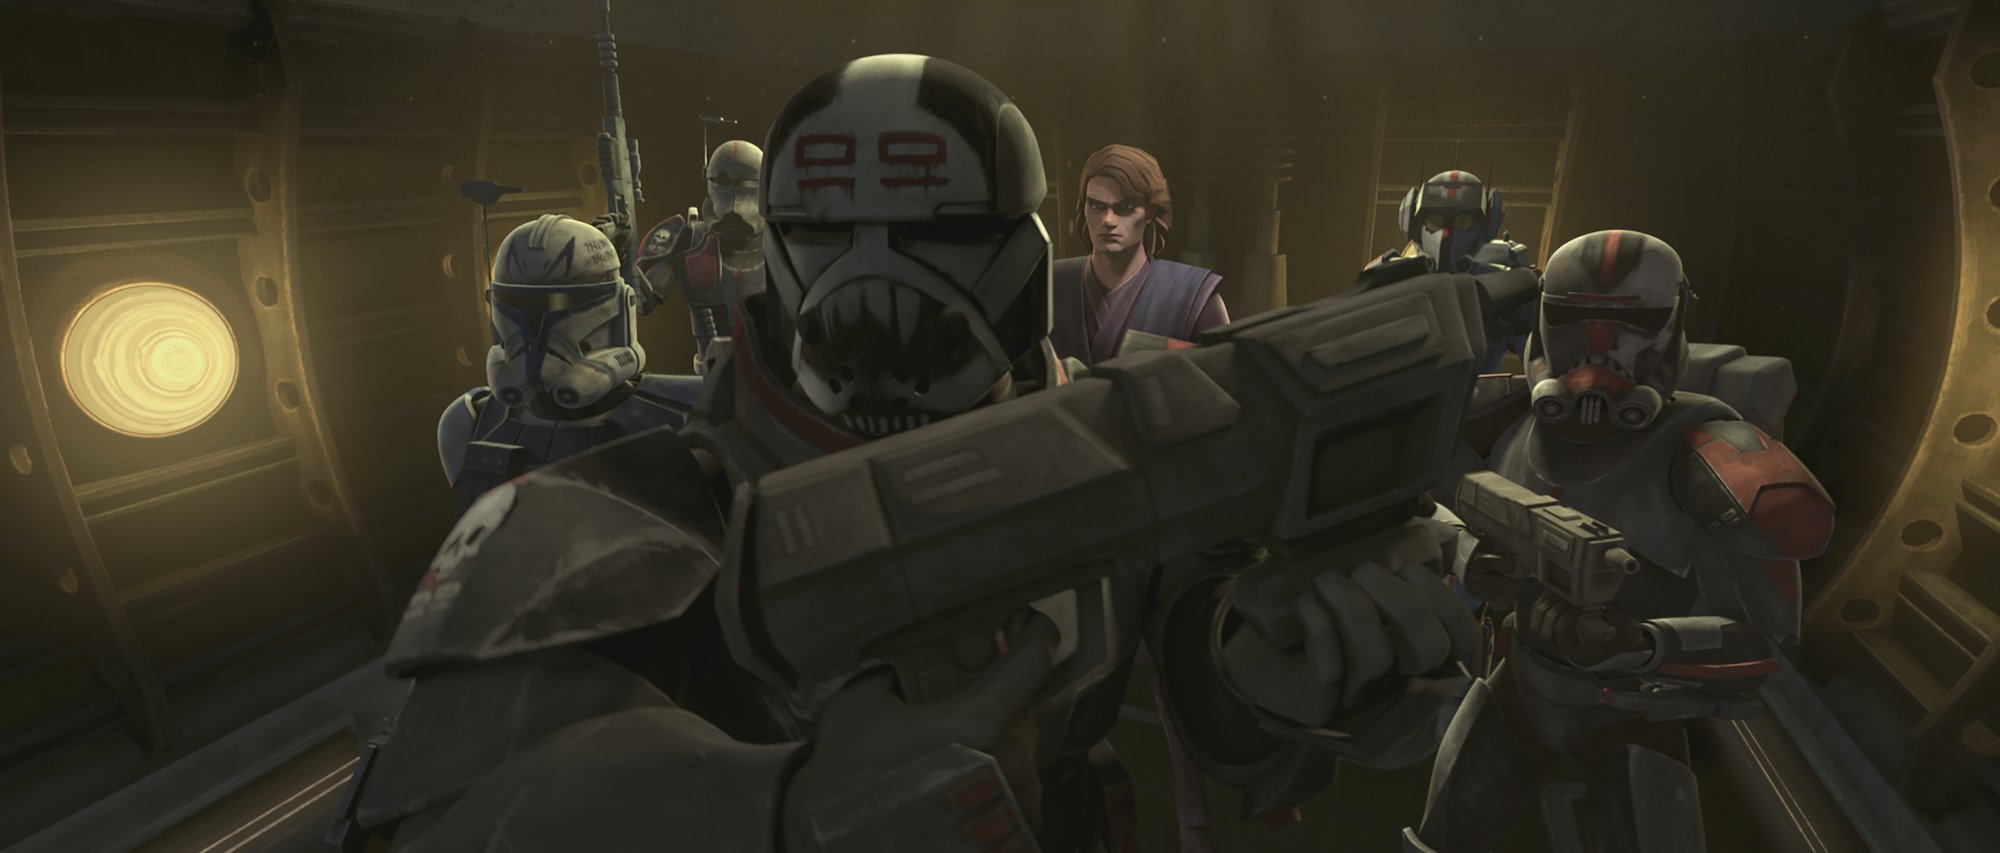 The Bad Batch go in to save Echo with Anakin Skywalker and Captain Rex in Season 7, 'The Clone Wars'